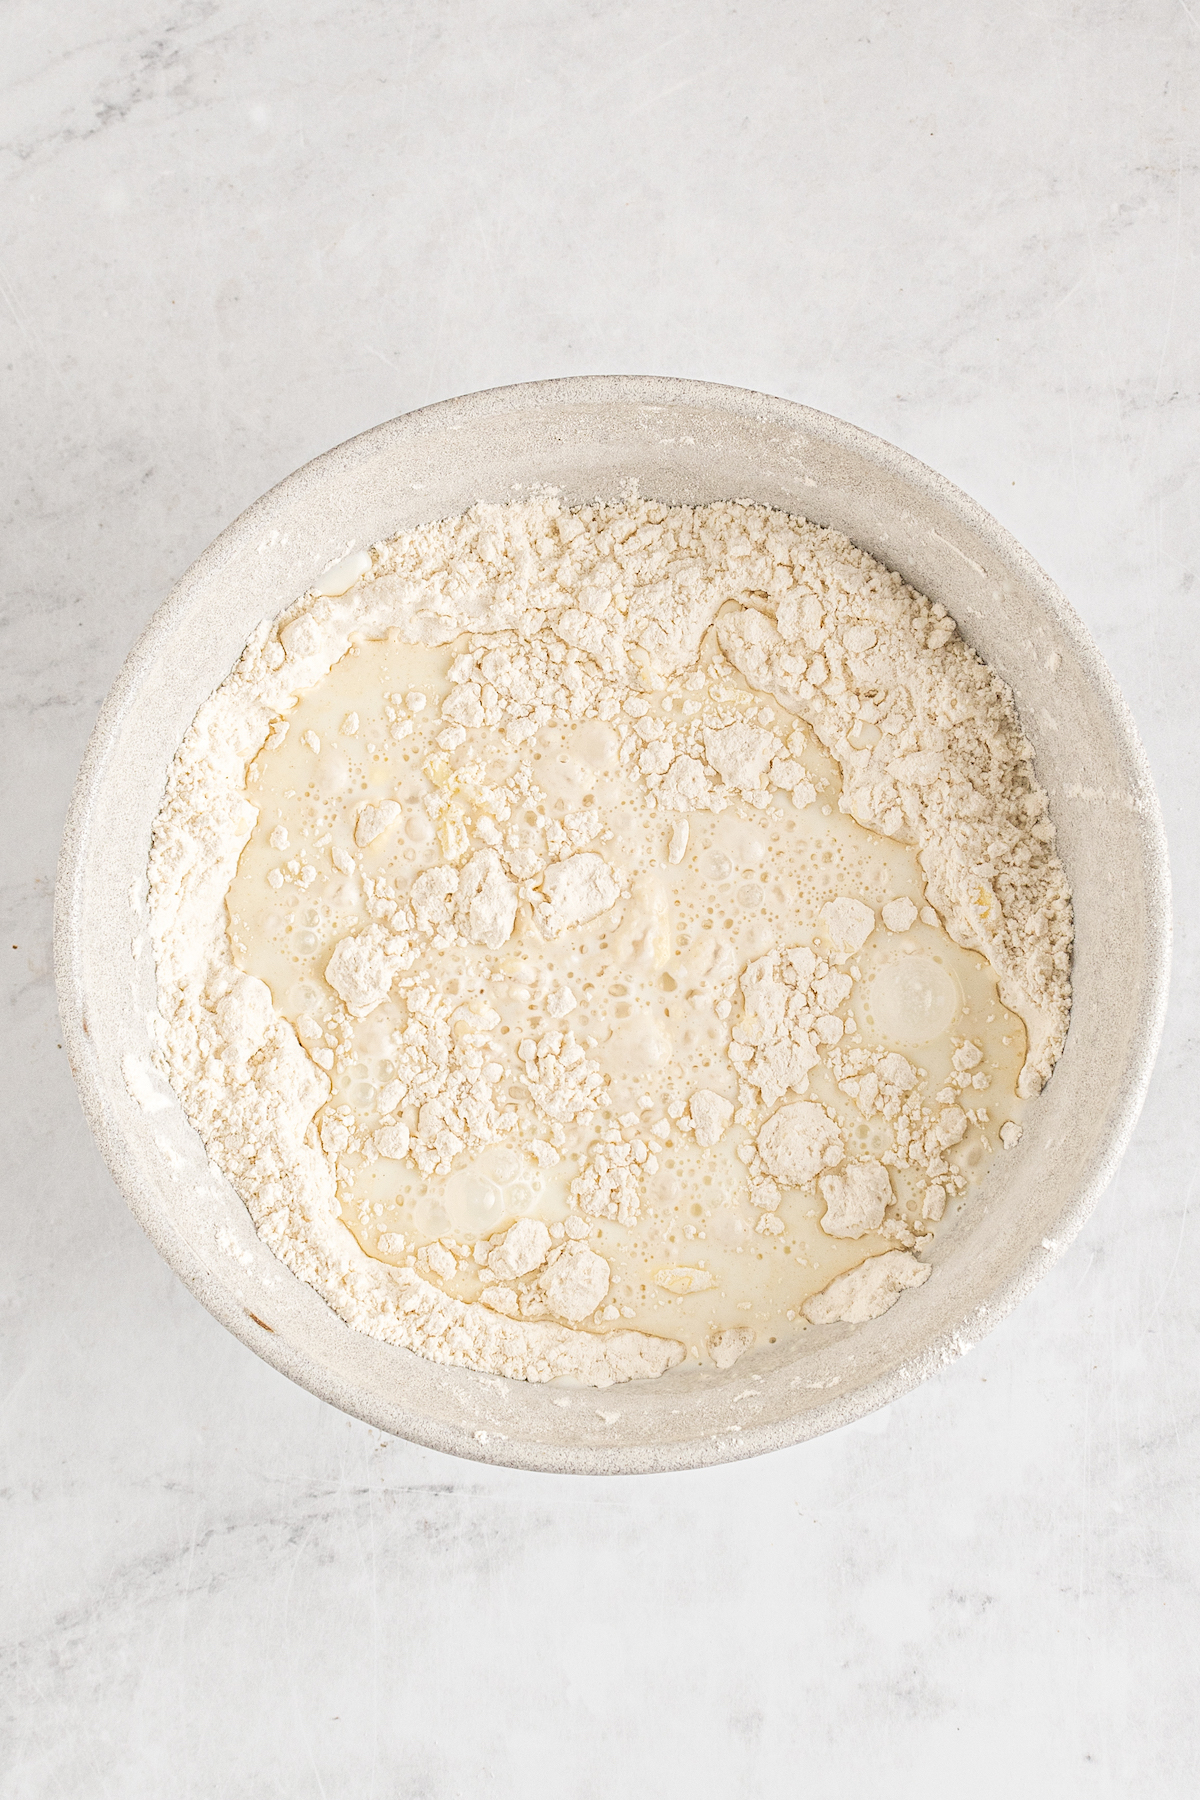 A bowl of unmixed biscuit dough ingredients.